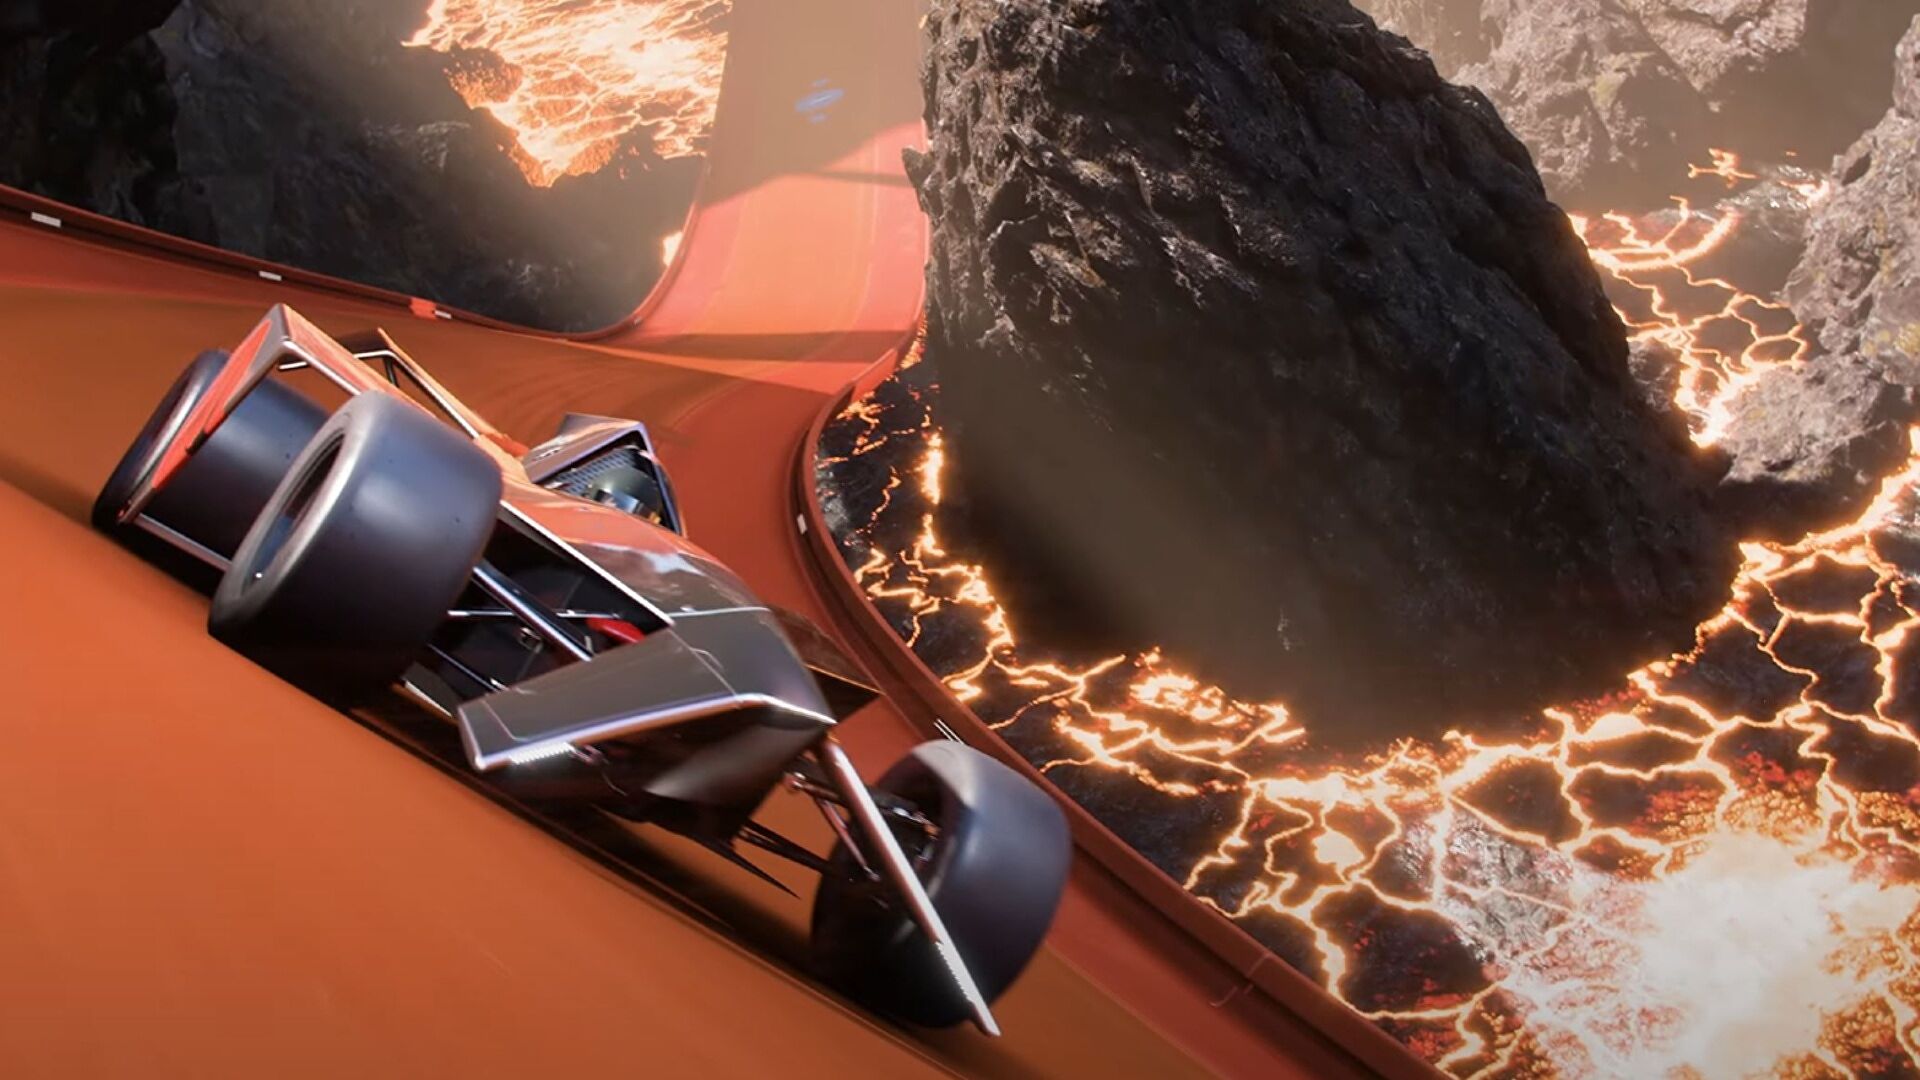 Forza Horizon 5 is getting a Hot Wheels expansion in the skies of Mexico